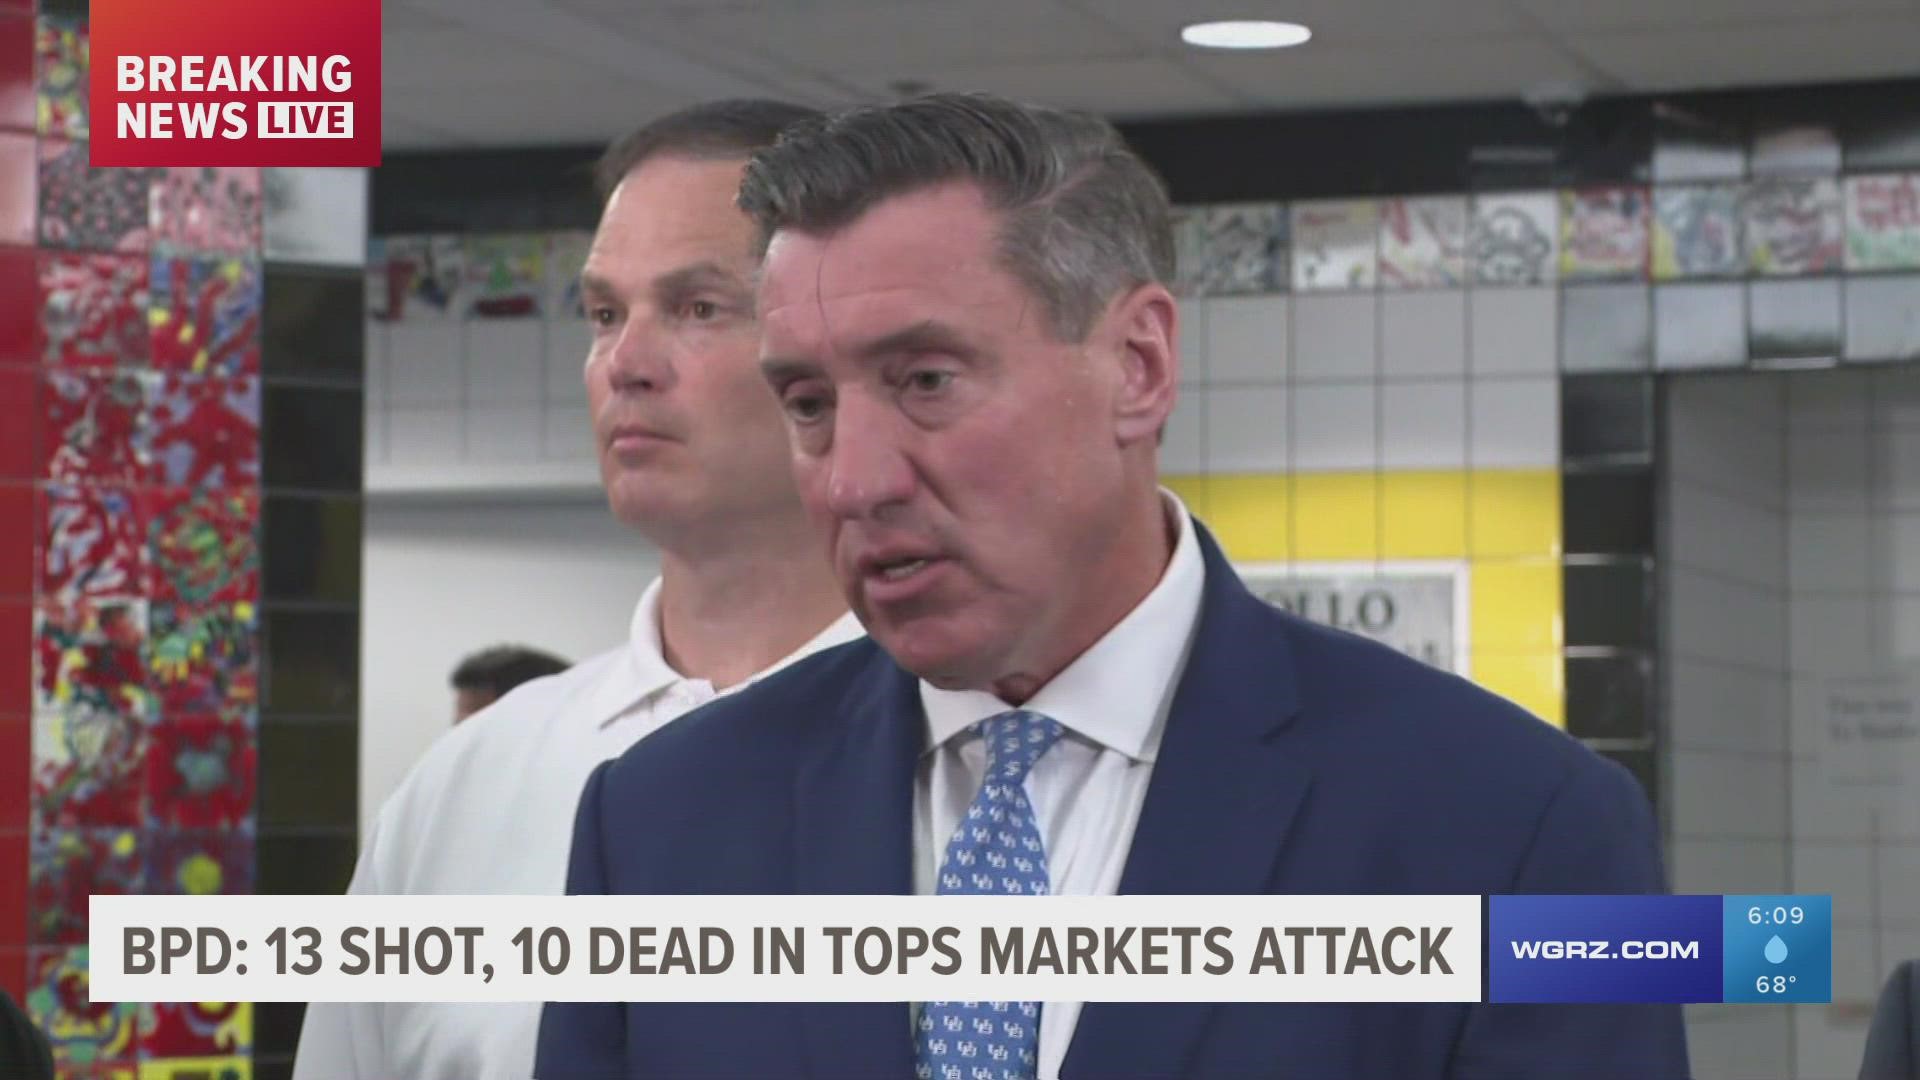 At Tops market in Buffalo, NY a white teen shot 11 Black people and two white people while live streaming, according to officials. 10 of those 13 were killed.